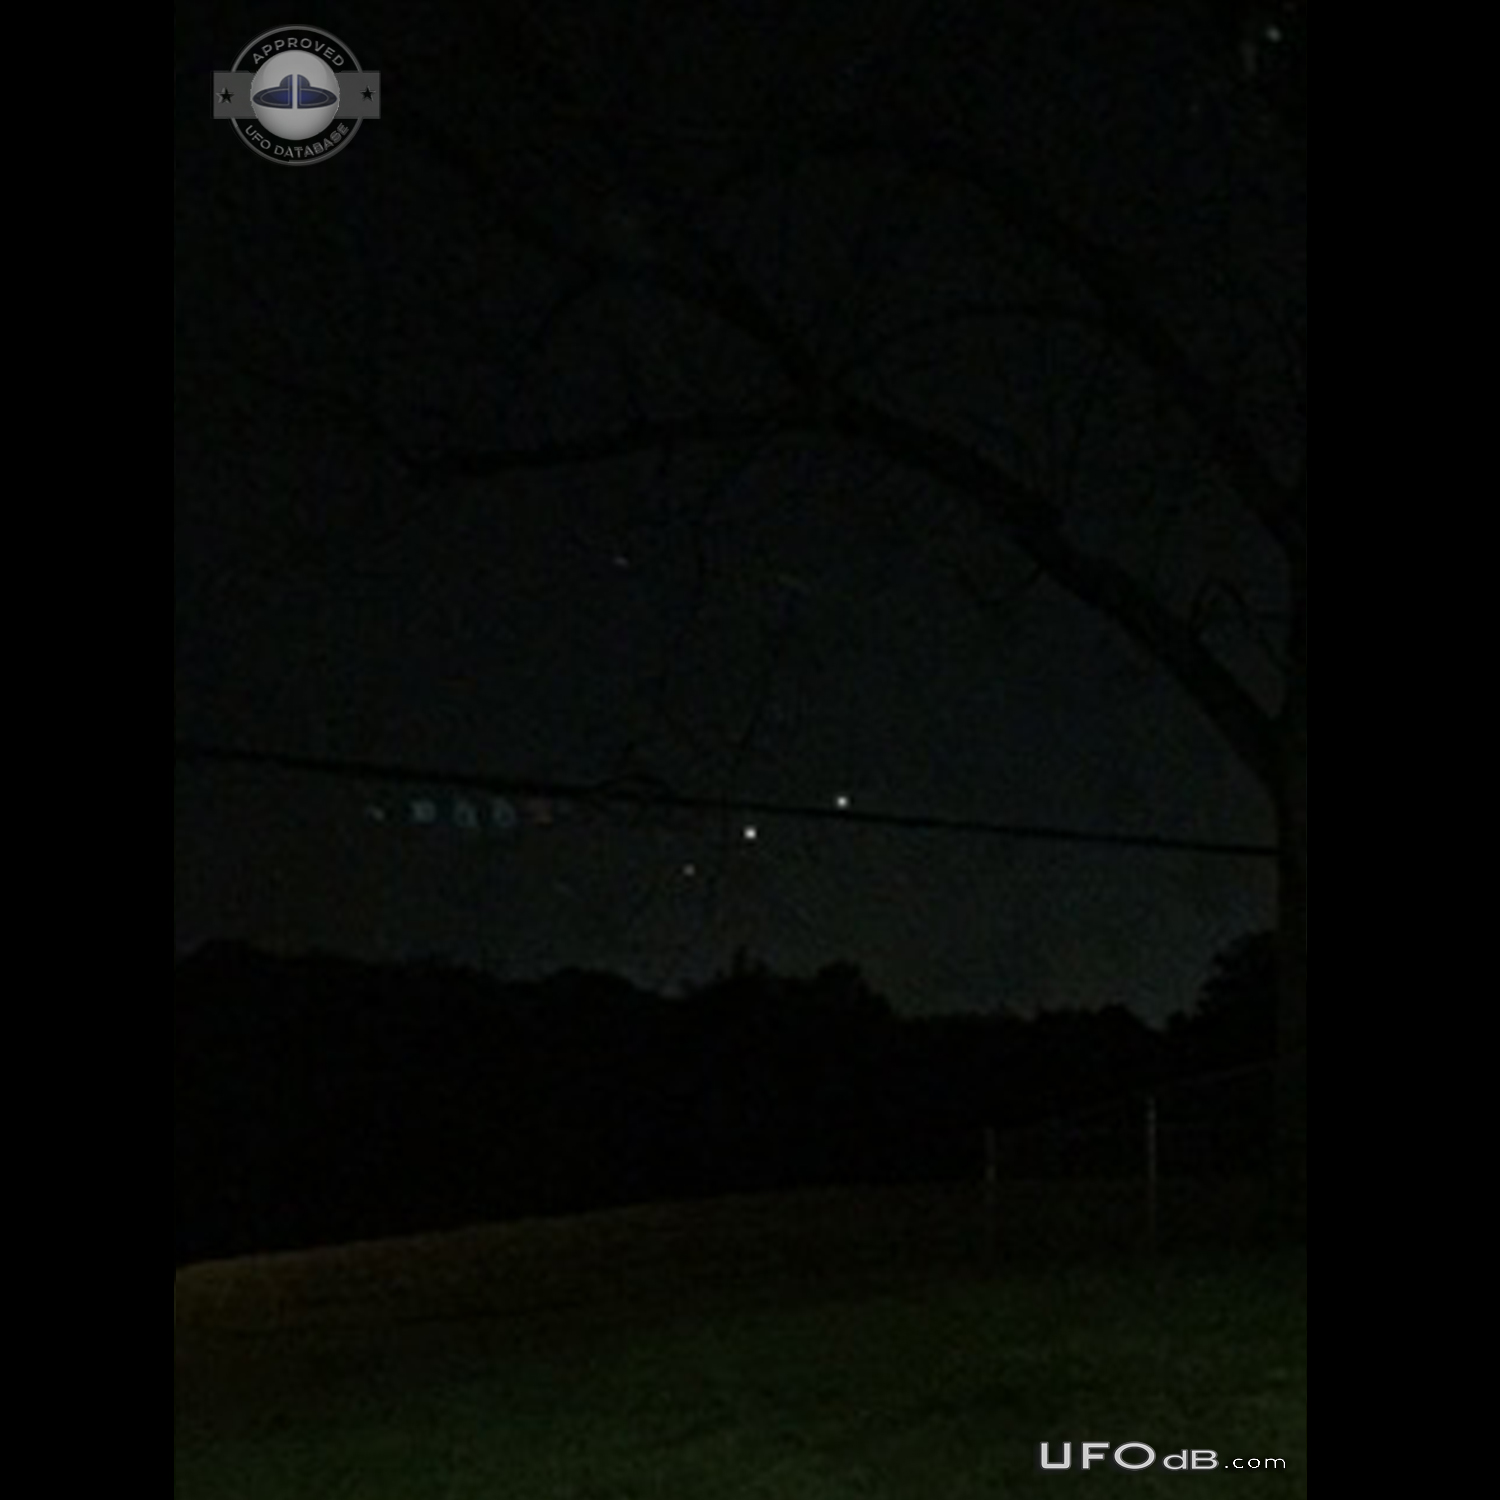 Perfect line of hovering UFOs low to ground - Hazelwood Missouri 2015 UFO Picture #737-2